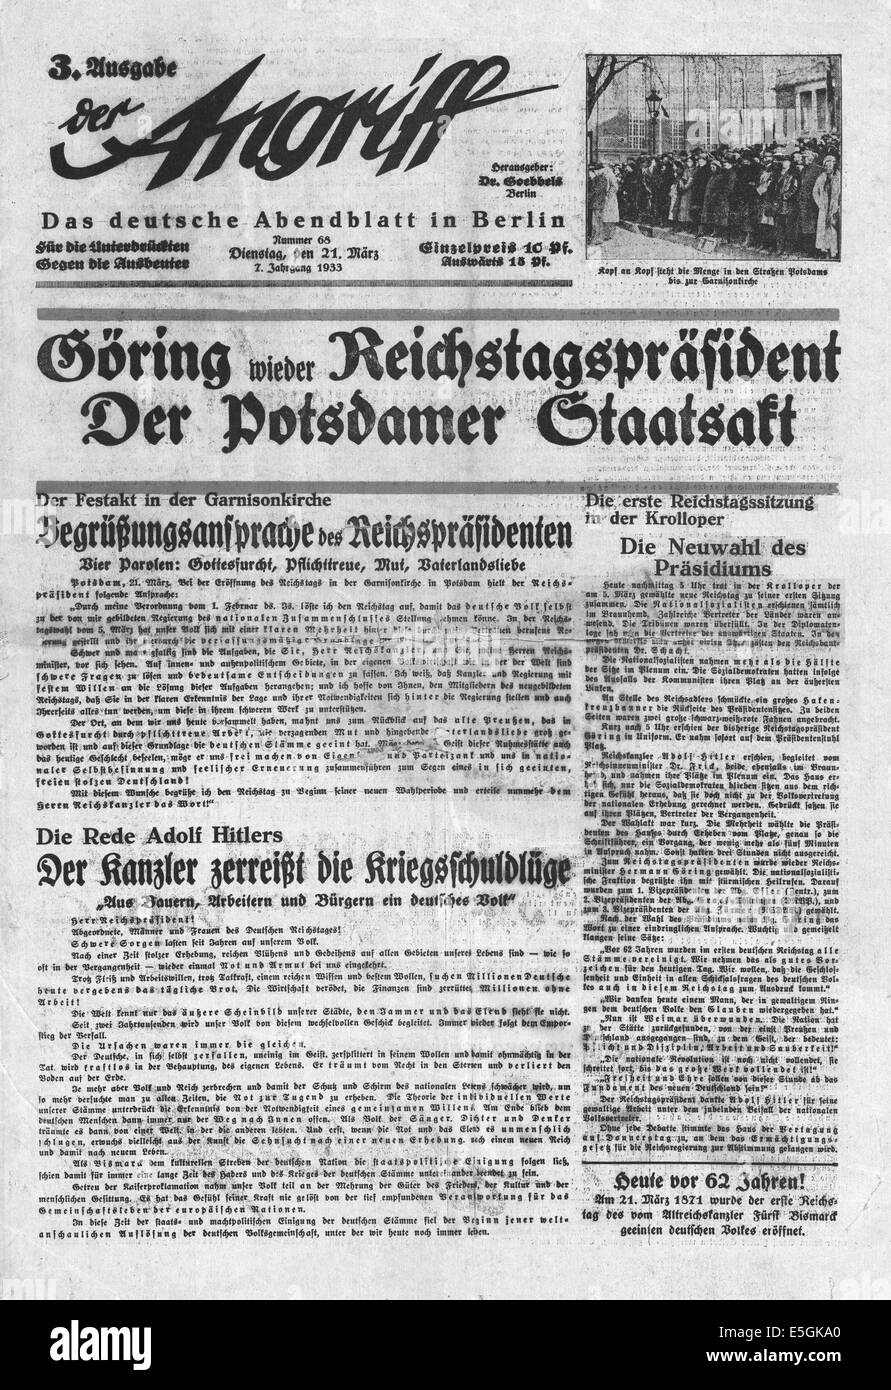 Der Angriff (Berlin, Germany) front page reporting Hermann Göring named as Reichstag President Stock Photo